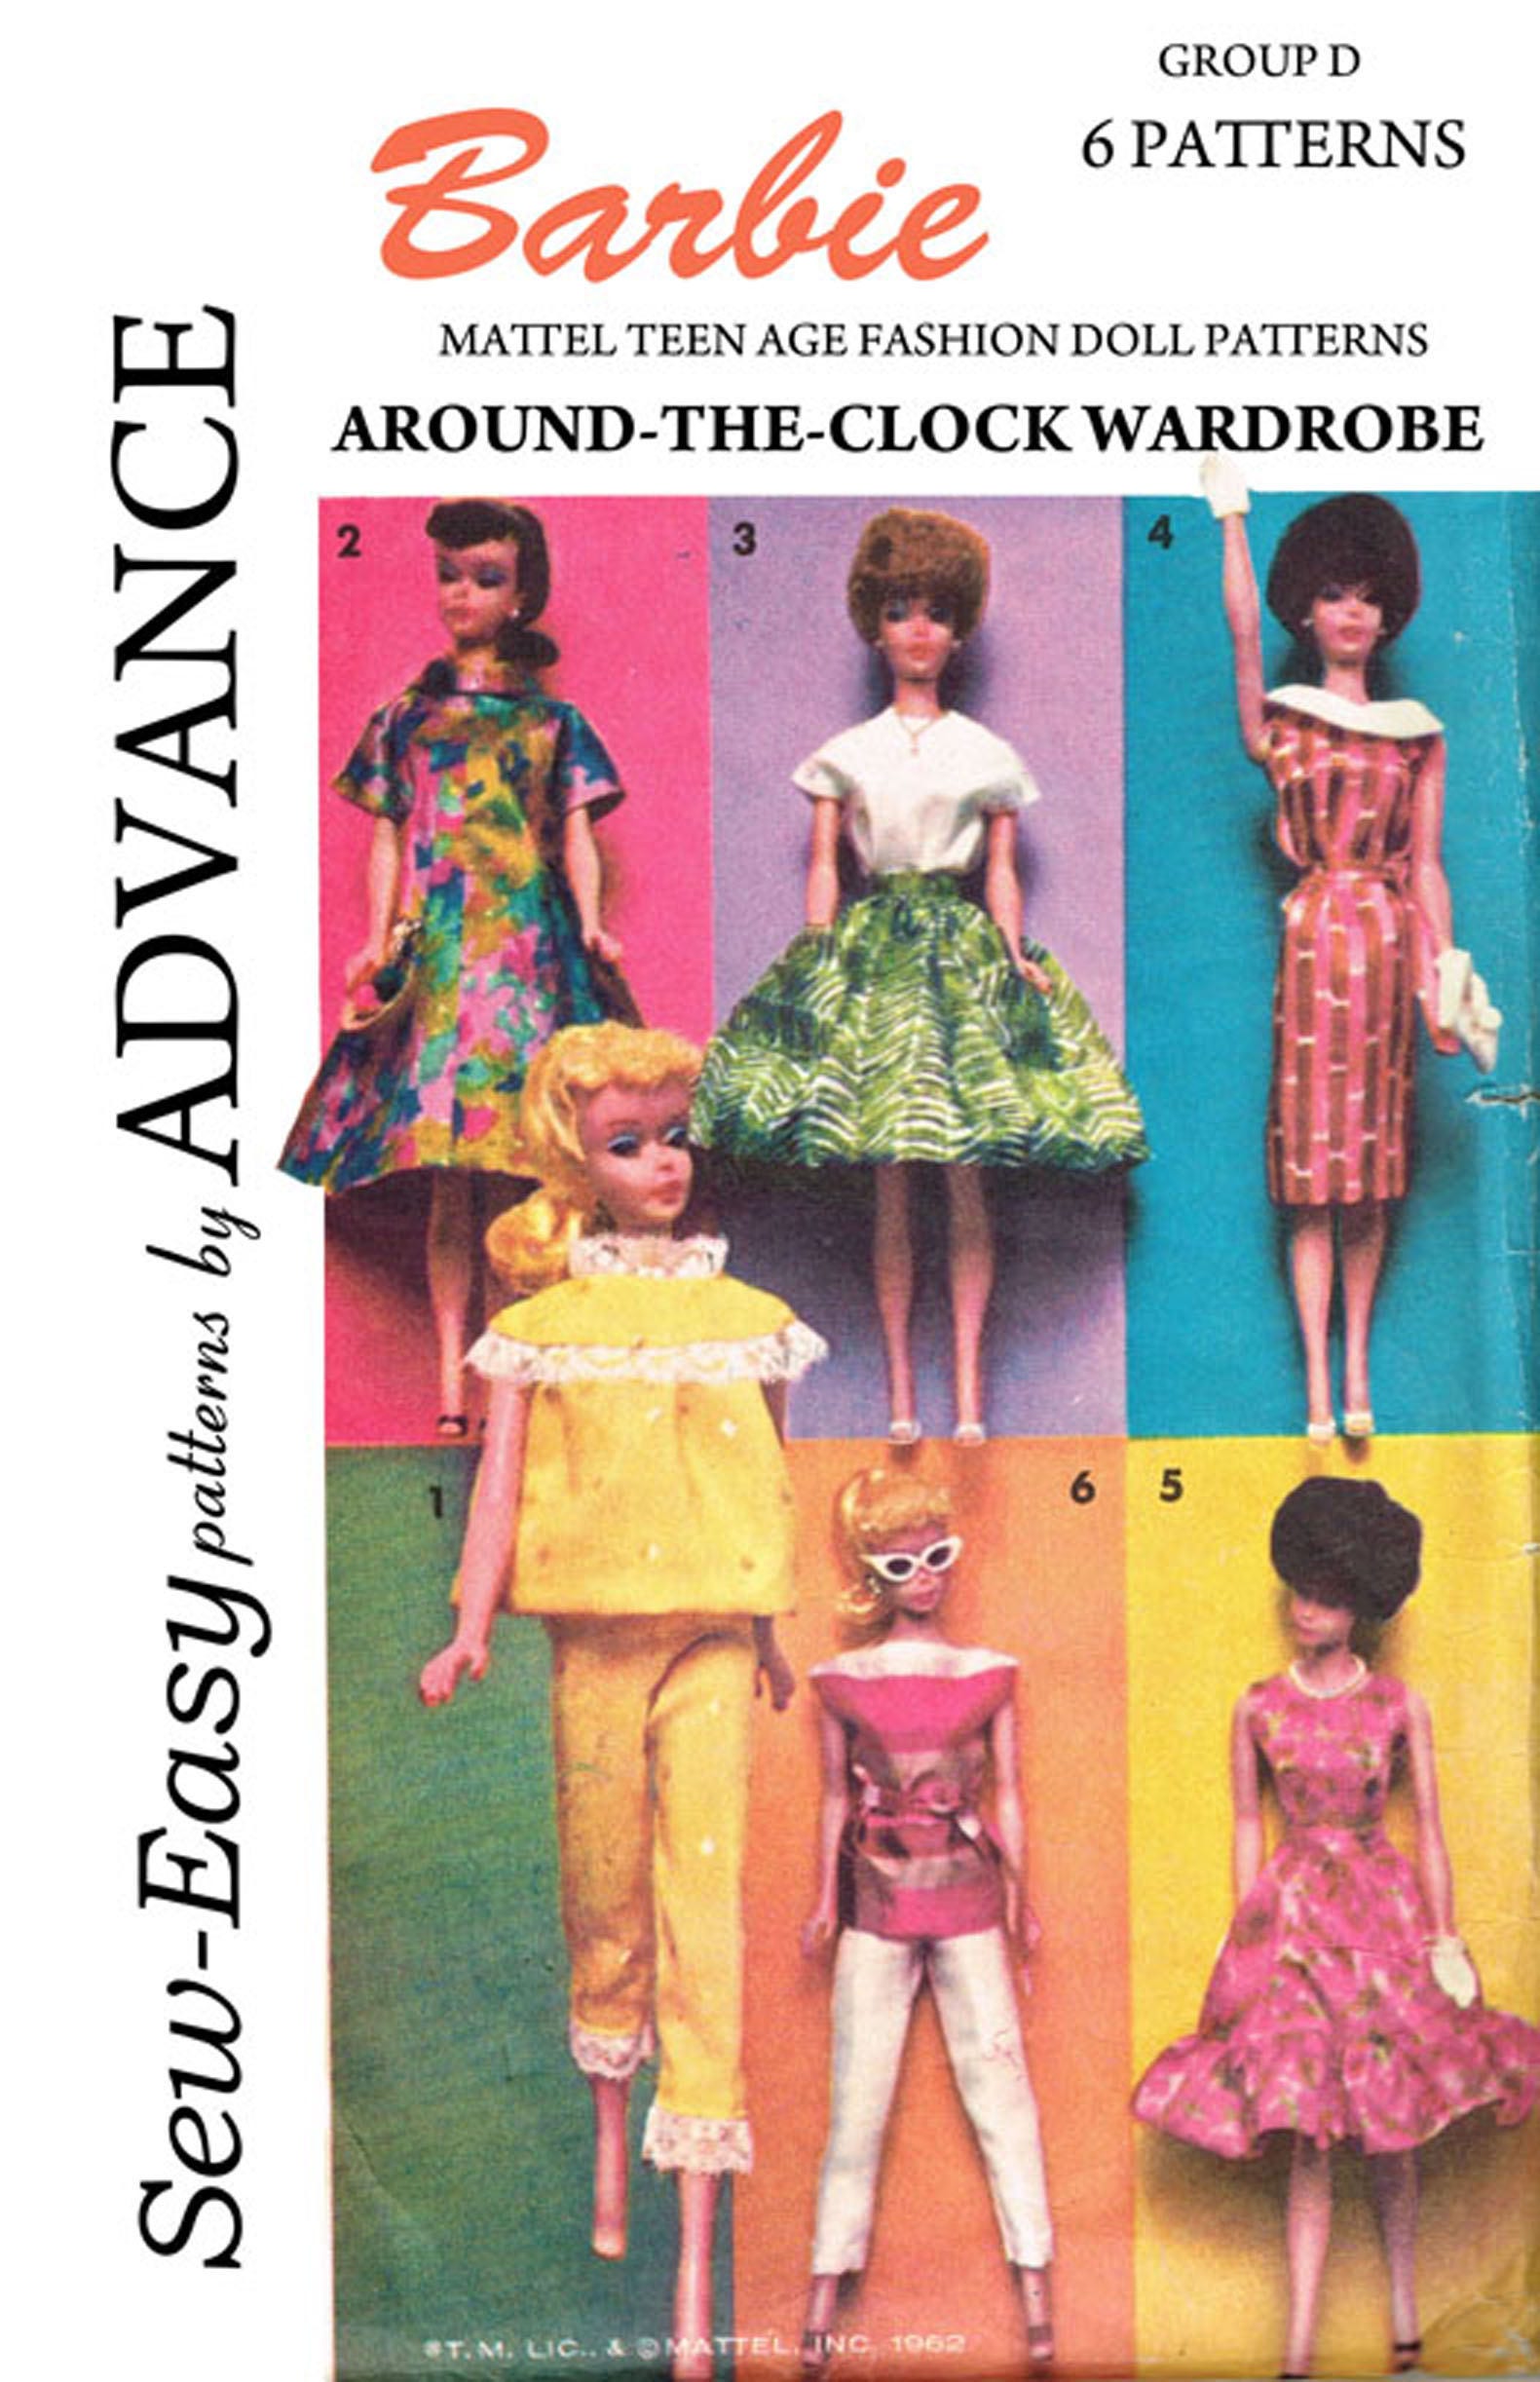 A great set of Barbie clothes sewing patterns for beginners